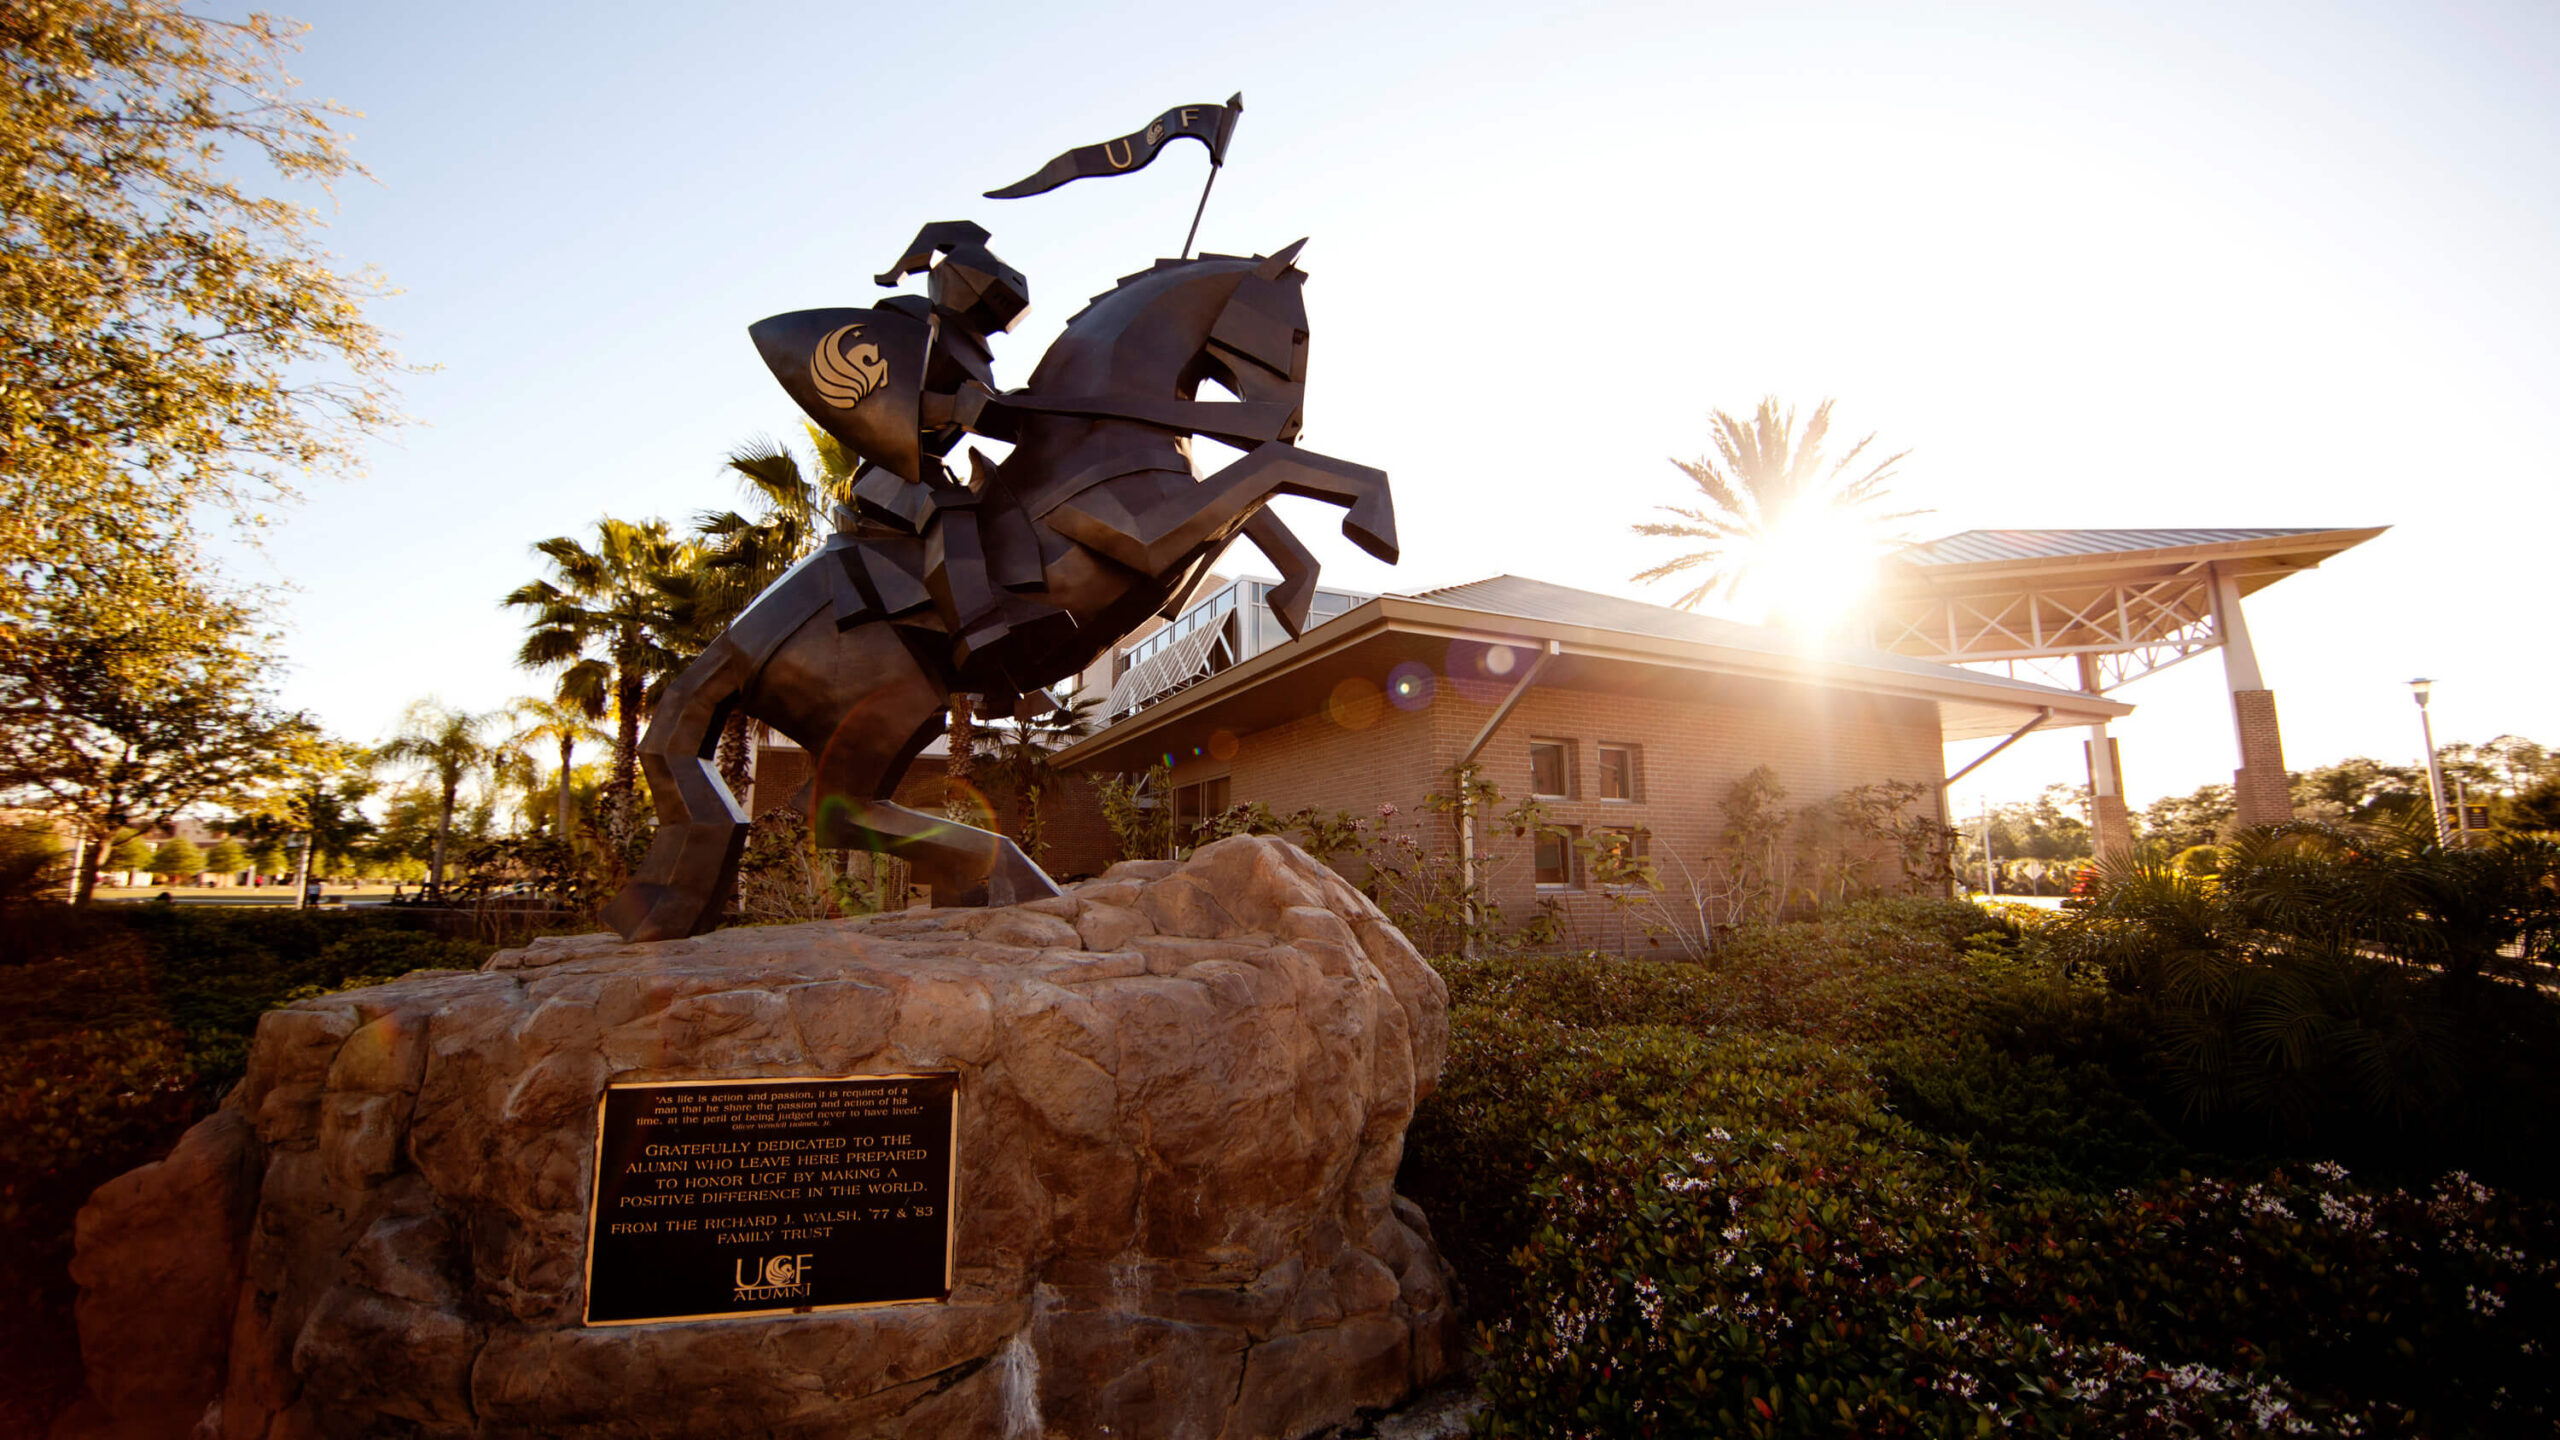 UCF Alumni Building and Victory Knight Statue